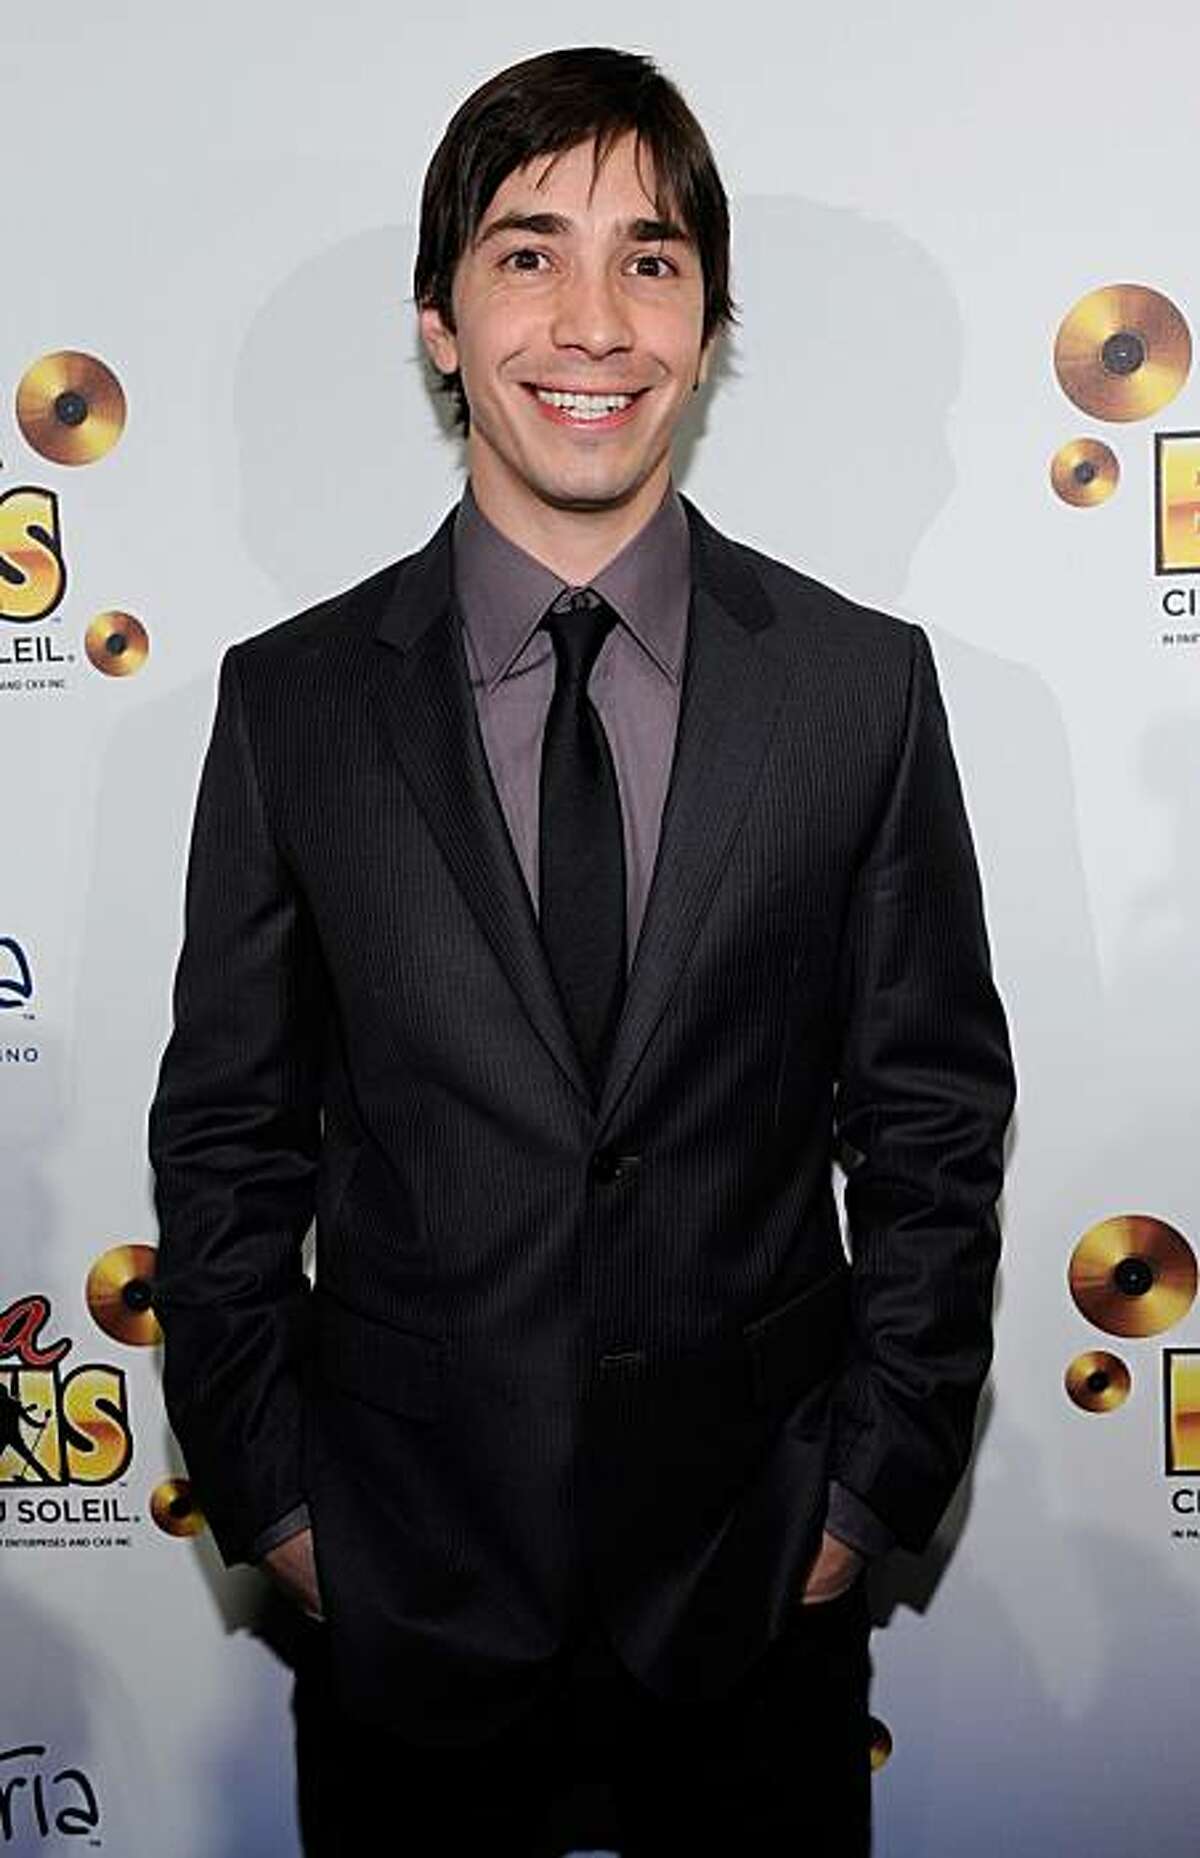 LAS VEGAS - FEBRUARY 19: Actor Justin Long arrives at the world premiere of Cirque du Soleil's "Viva ELVIS" production at the Aria Resort & Casino at CityCenter February 19, 2010 in Las Vegas, Nevada. (Photo by Ethan Miller/Getty Images for Cirque du Soleil)